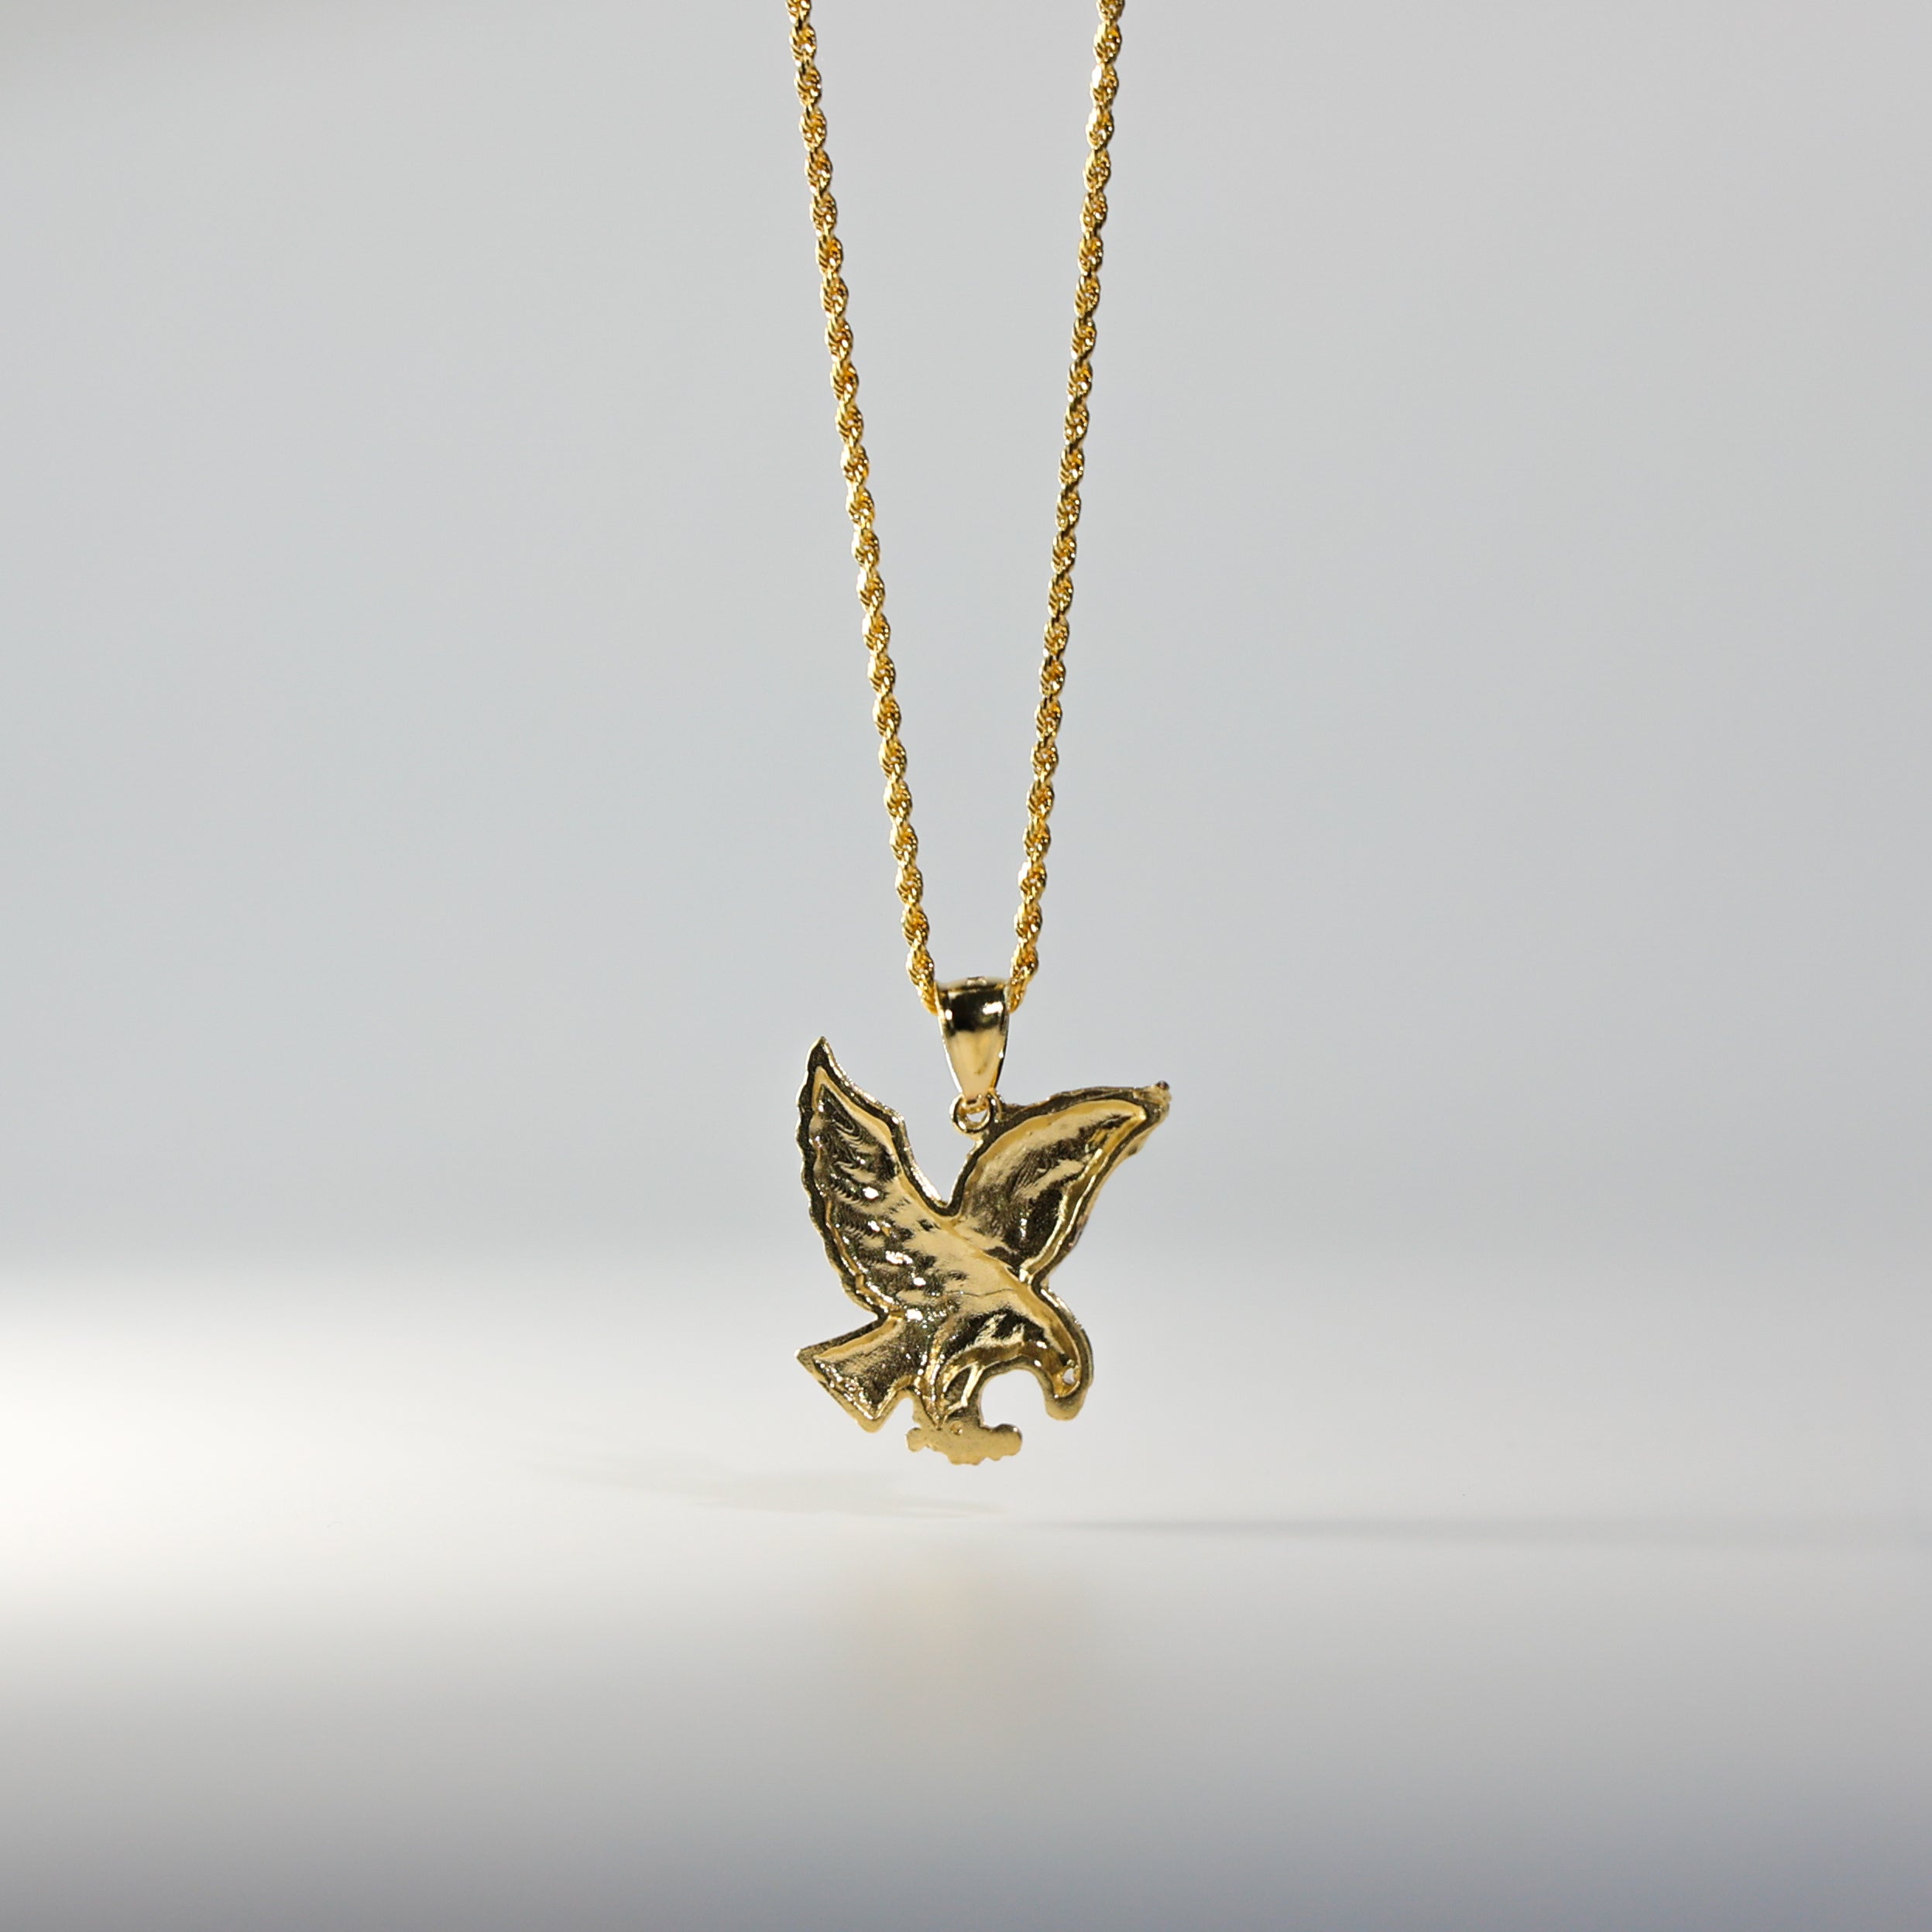 Gold Eagle Pendant Model-1597 - Charlie & Co. Jewelry